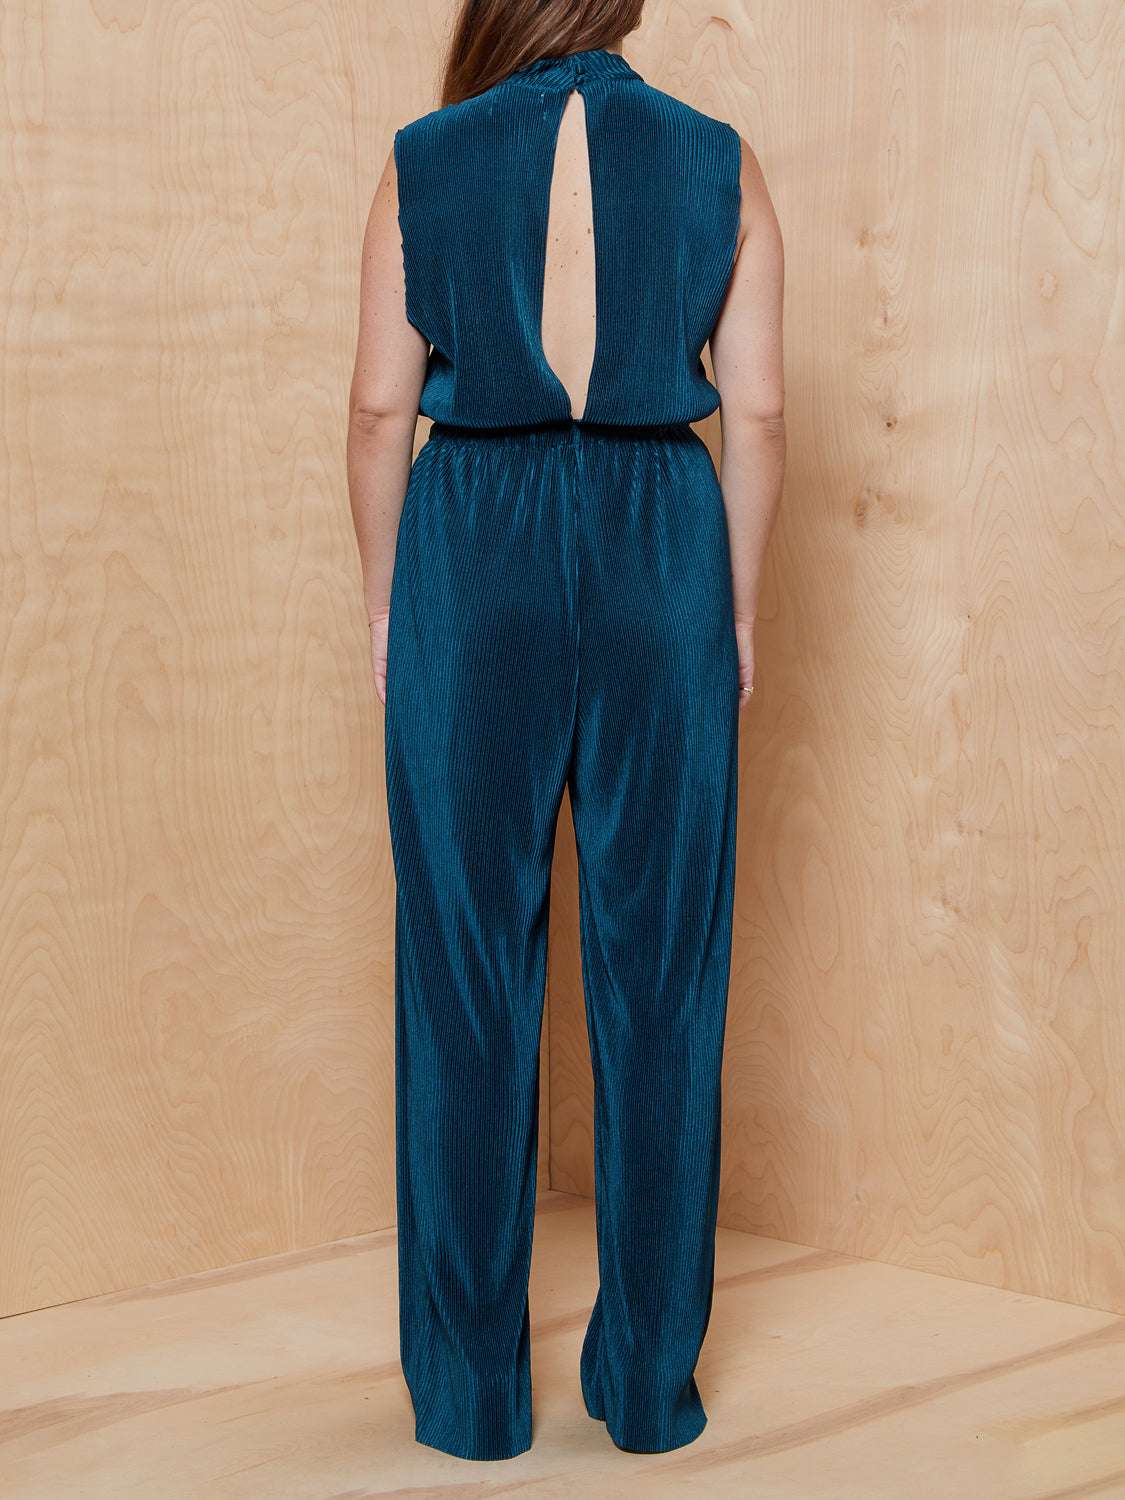 Urban Outfitters Plisse Teal Jumpsuit